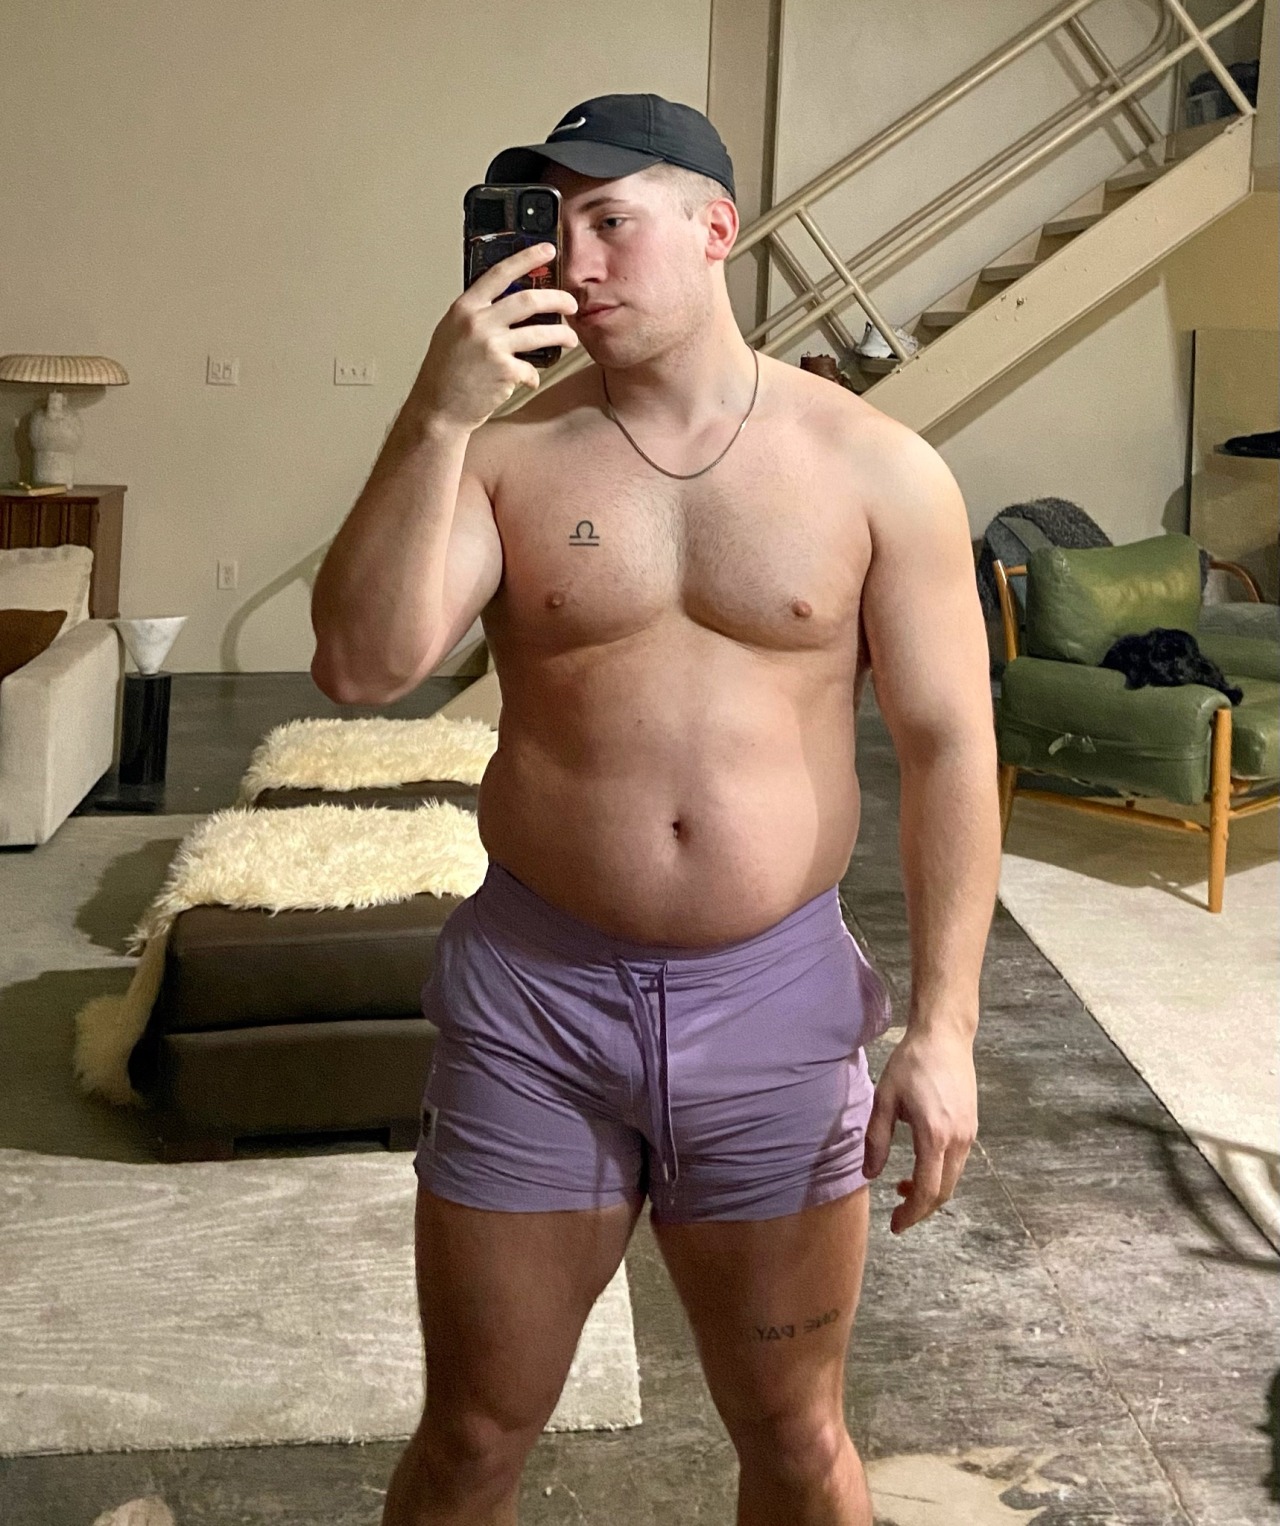 thic-as-thieves:If you look carefully, you can see the remnants of long lost abs